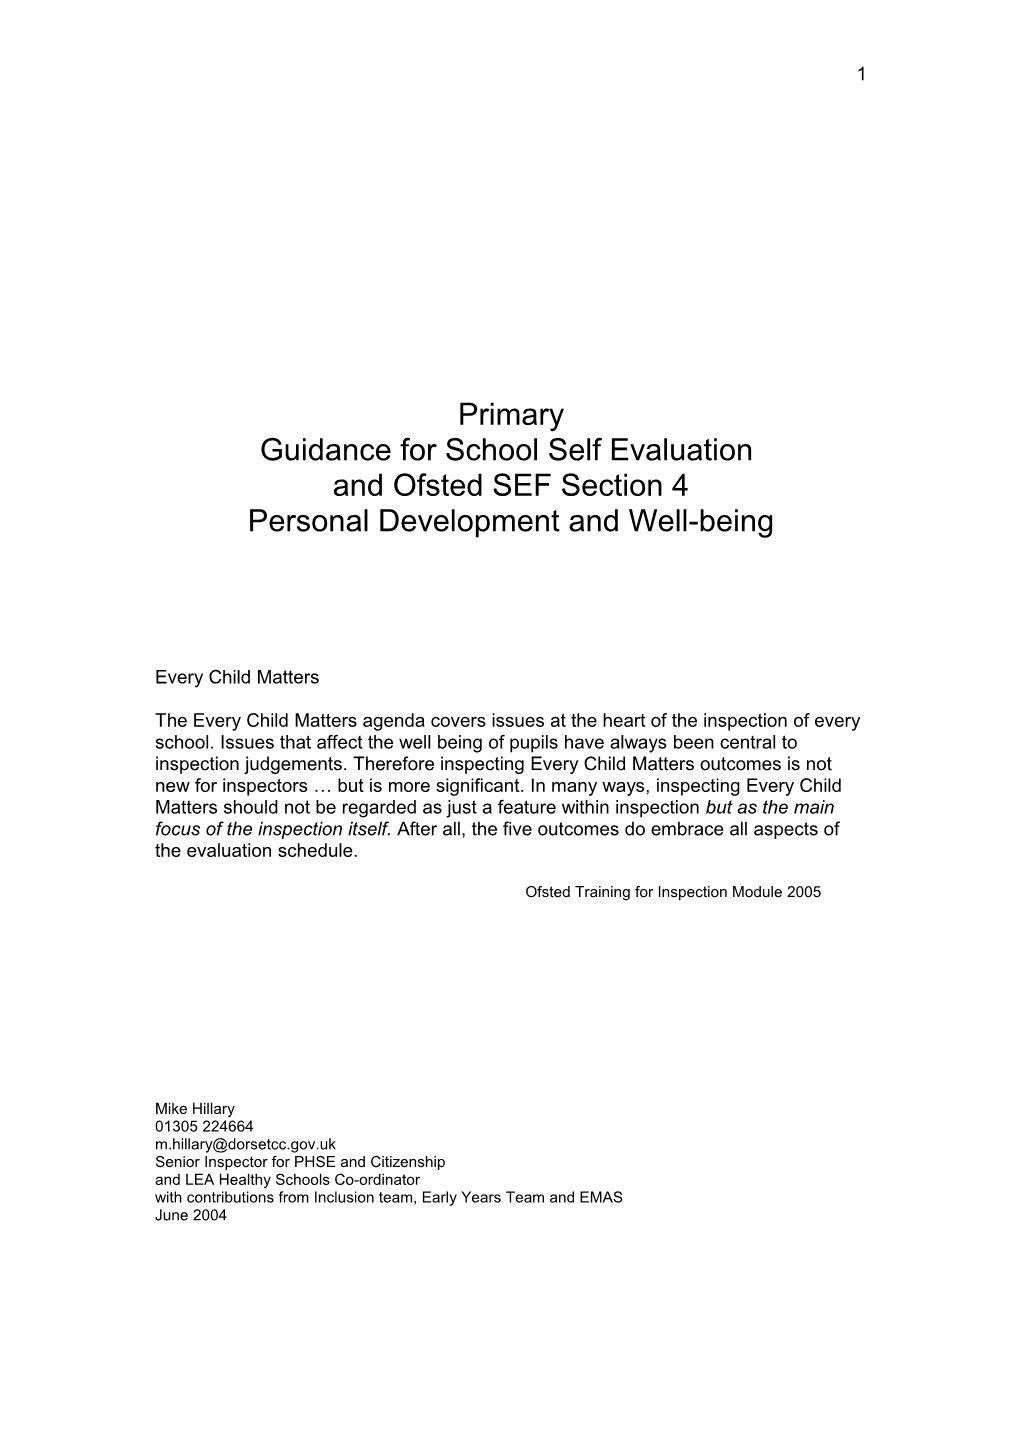 Guidance for School Self Evaluation